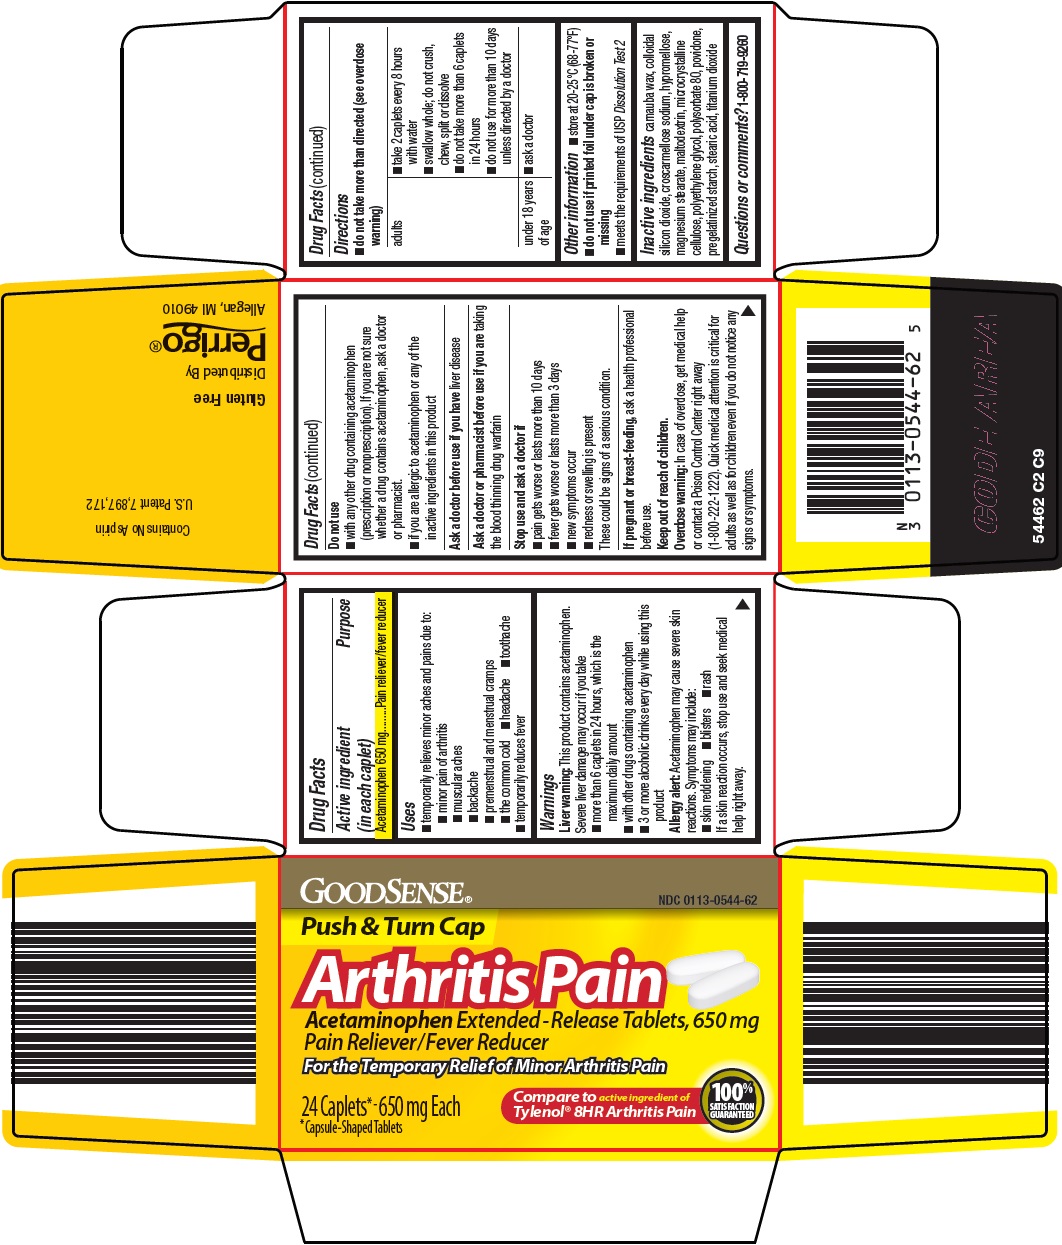 What is the best medicine for arthritis pain?